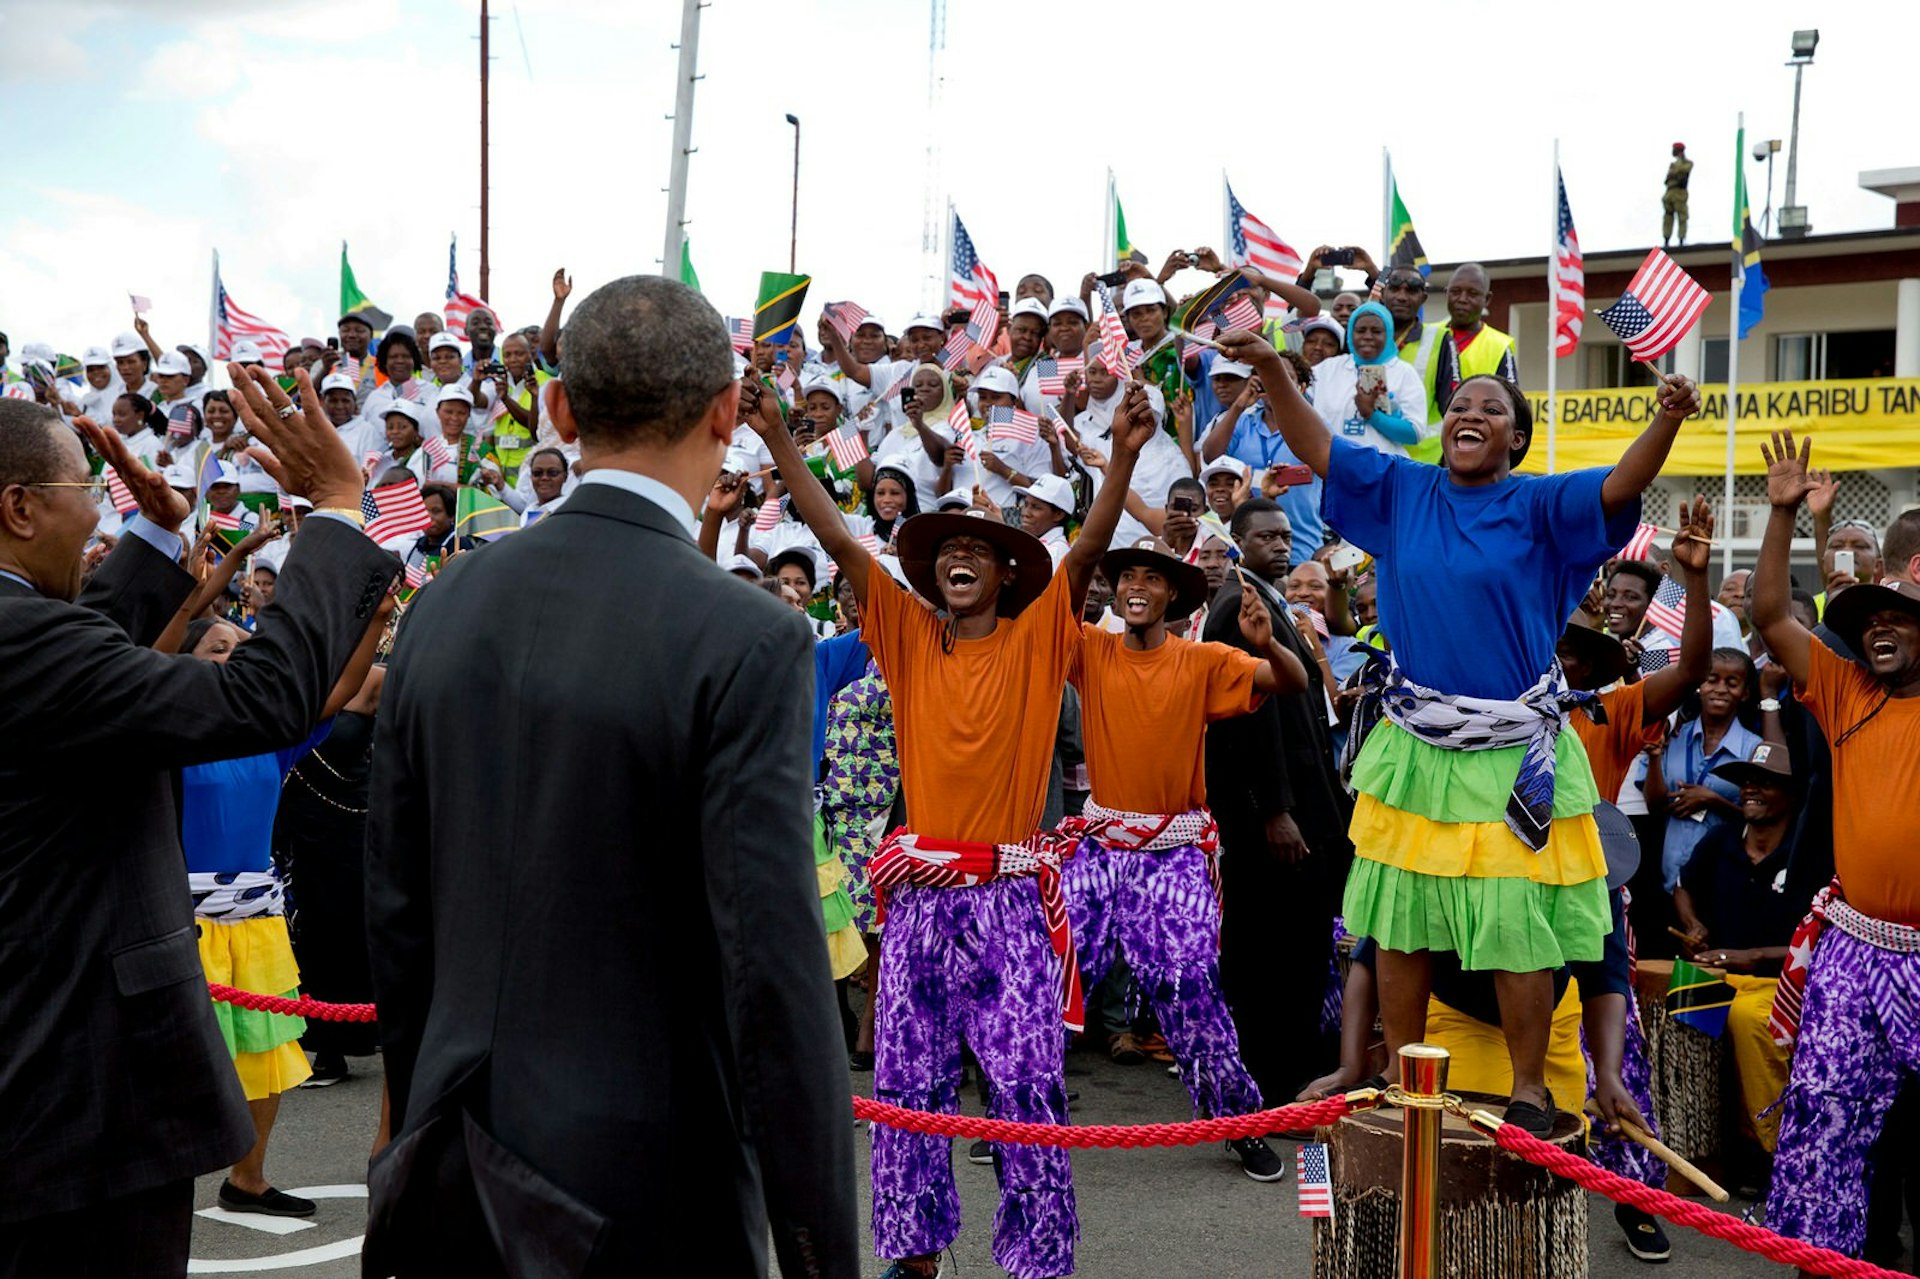 President Obama watching performers on the tarmac at Julius Nyerere International Airport in Dar es Salaam, Tanzania, July 2, 2013 © Pete Souza / Official White House Photo